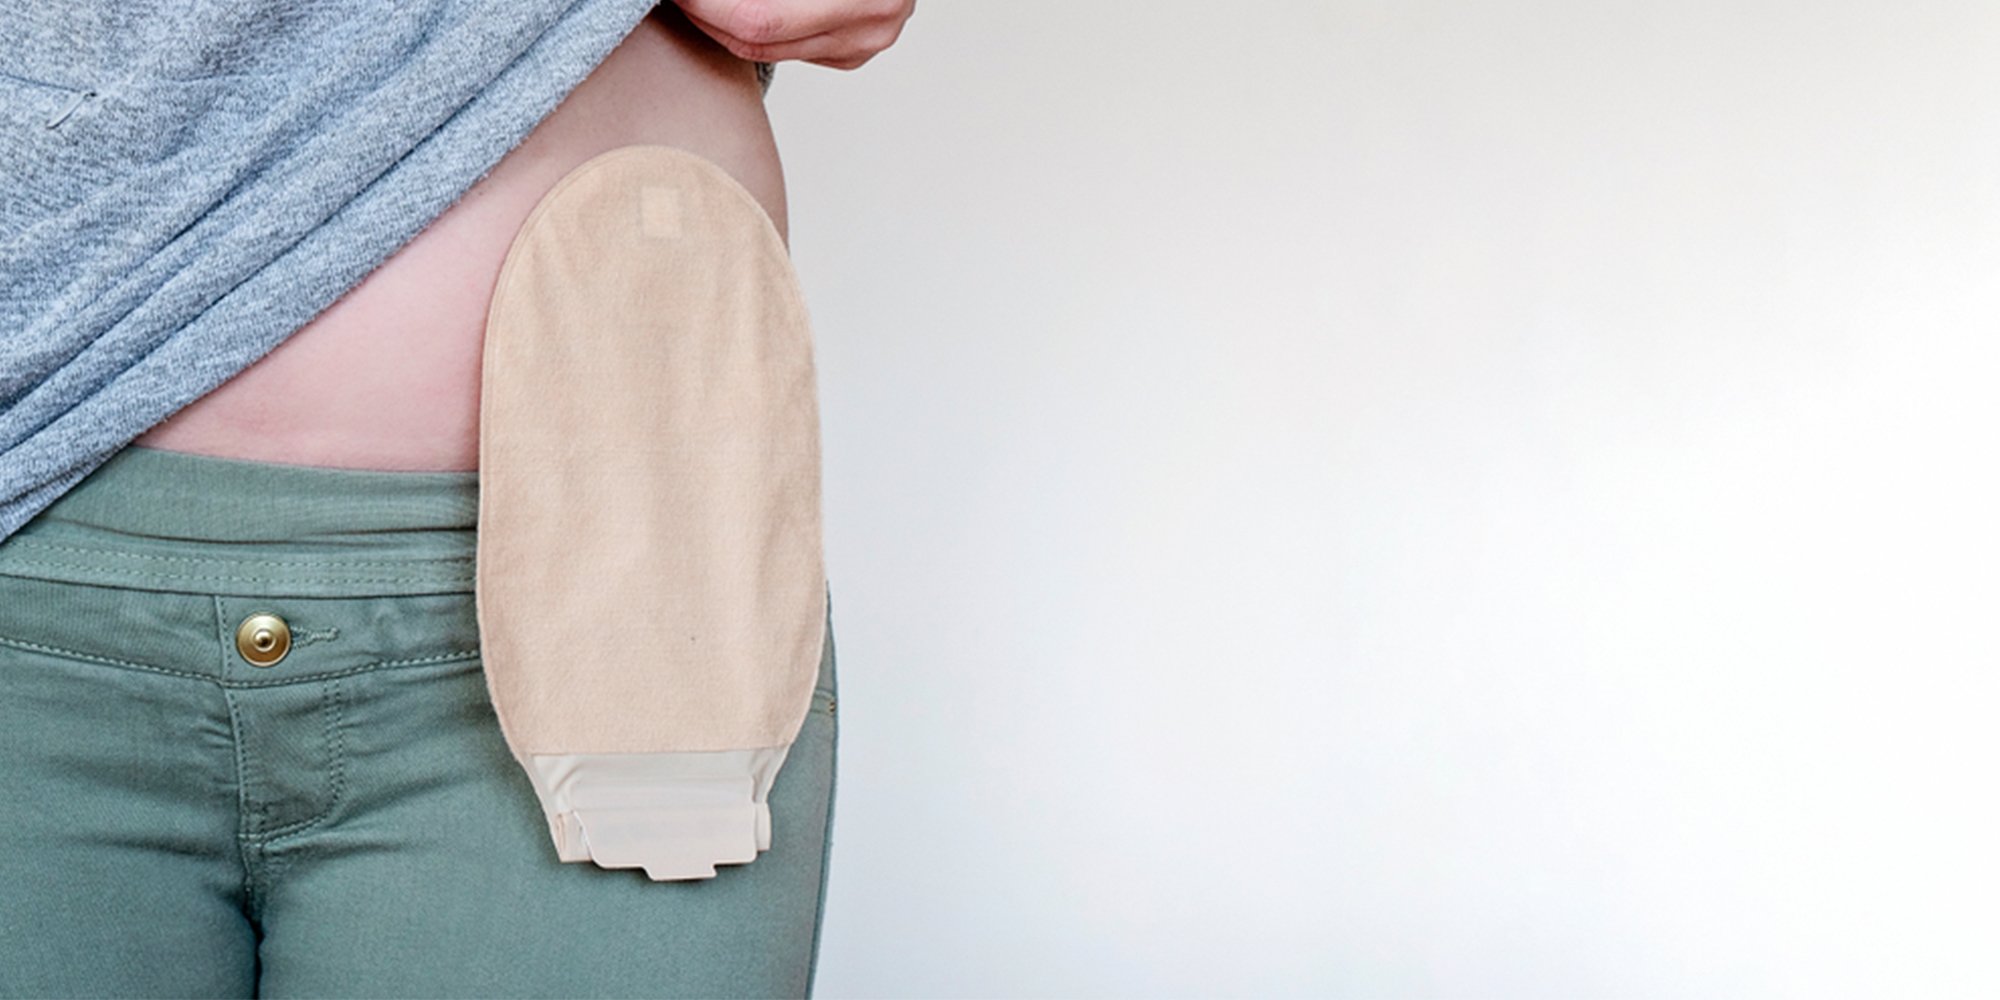 7 Types of Ostomy Bags to Use After Surgery